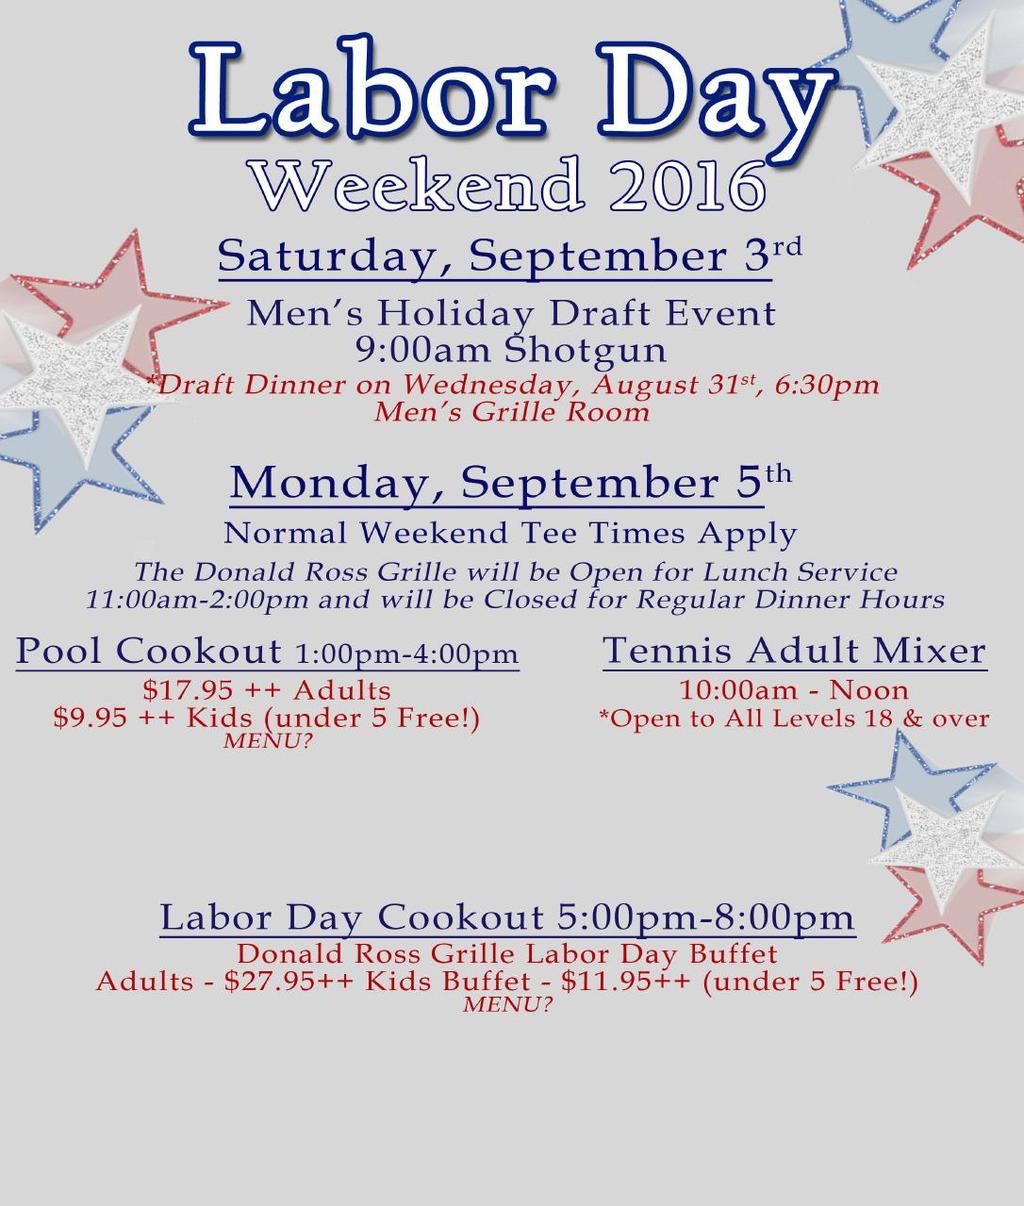 Saturday, September 3 rd Men s Holiday Draft Event 9:00am Shotgun *Draft Dinner on Wednesday, August 31 st at 6:30pm In the Men s Grille Room Monday, September 5 th Normal Weekend Tee Times Apply